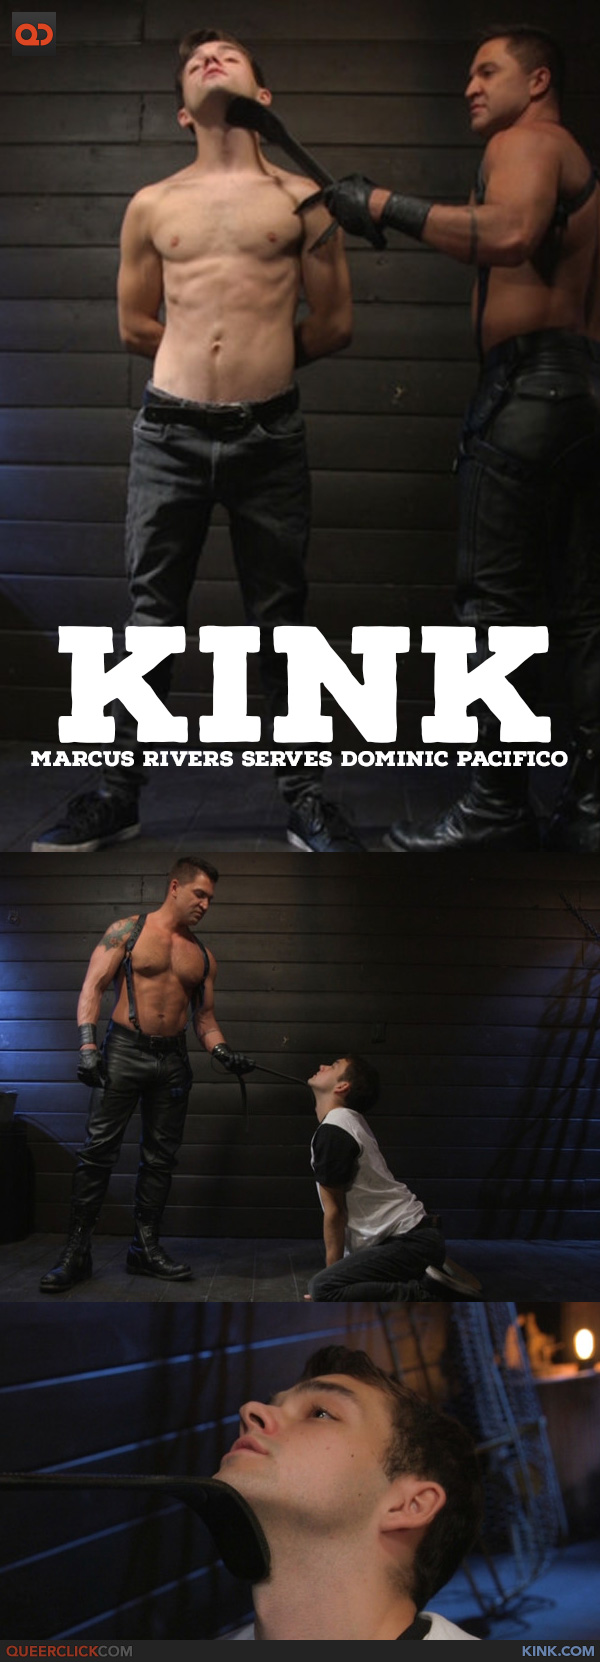 Kink: Obedient Slave, Marcus Rivers Serves Dominic Pacifico